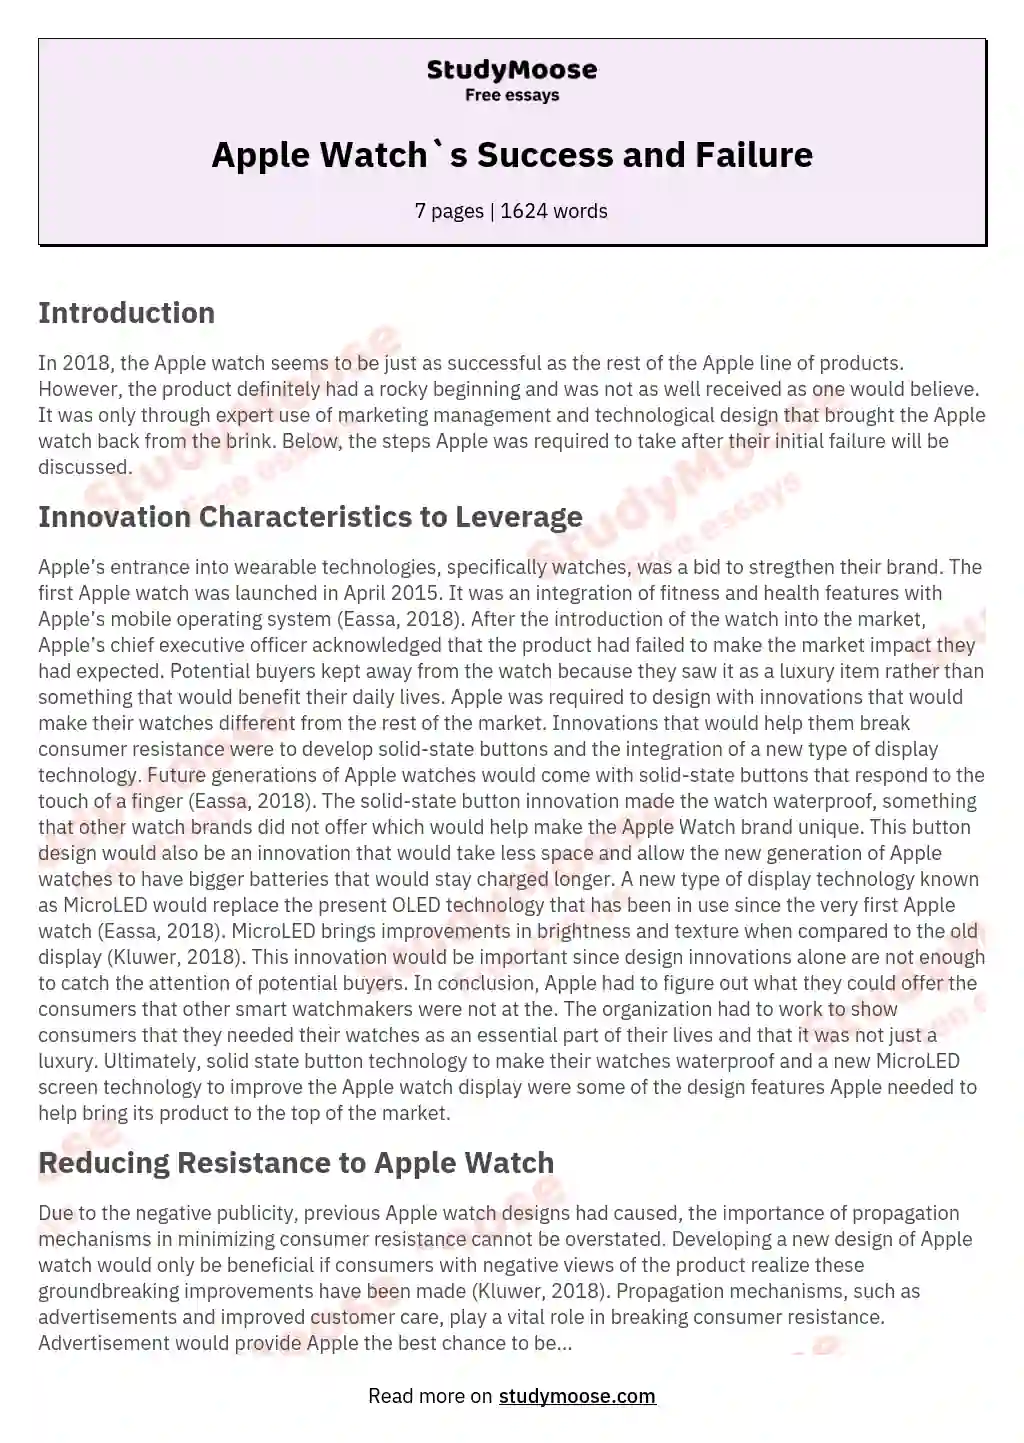 essay about apple watch